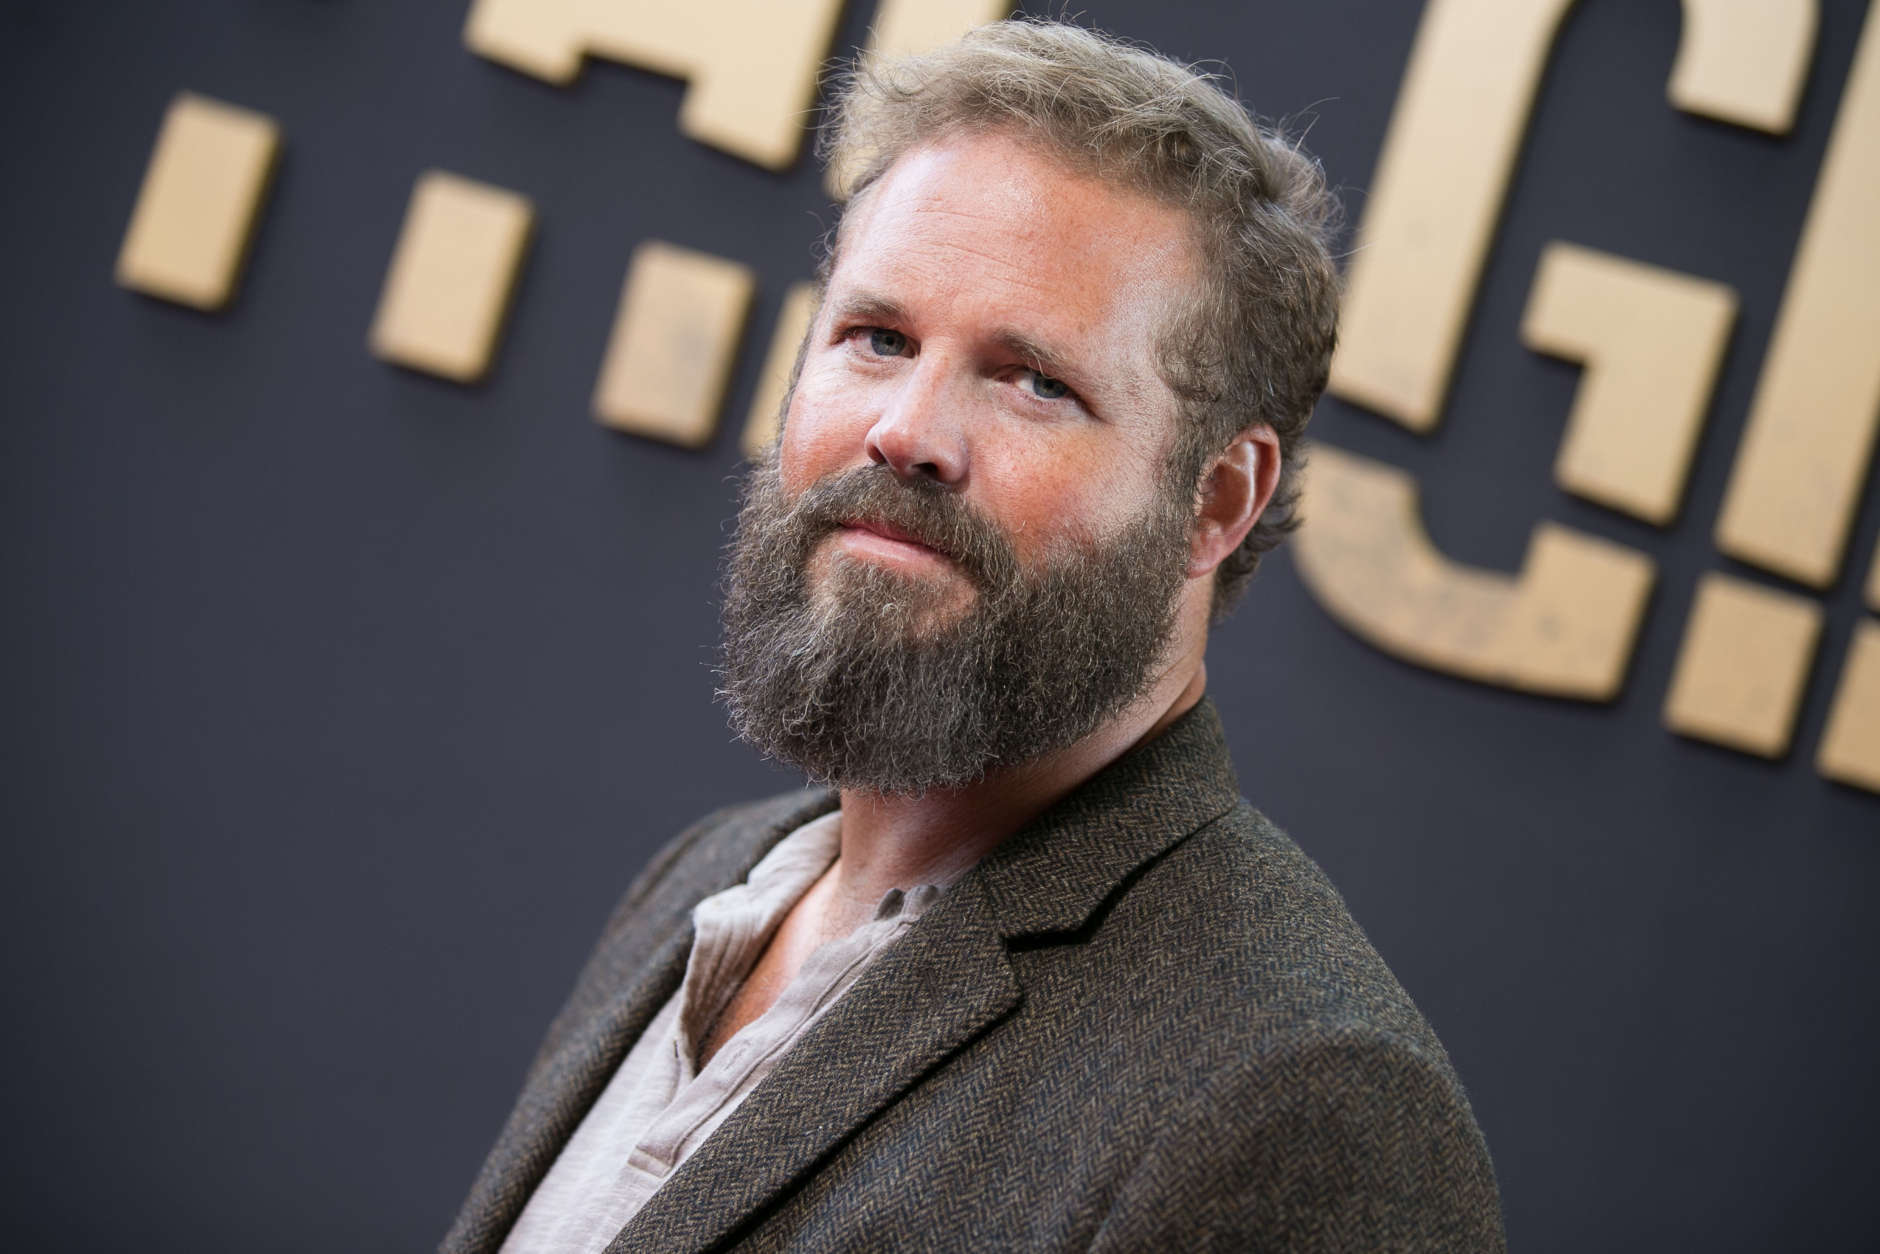 David Denman arrives at the LA Premiere of "The Gift" held at Regal Cinemas L.A. Live on Thursday, July 30, 2015, in Los Angeles. (Photo by John Salangsang/Invision/AP)